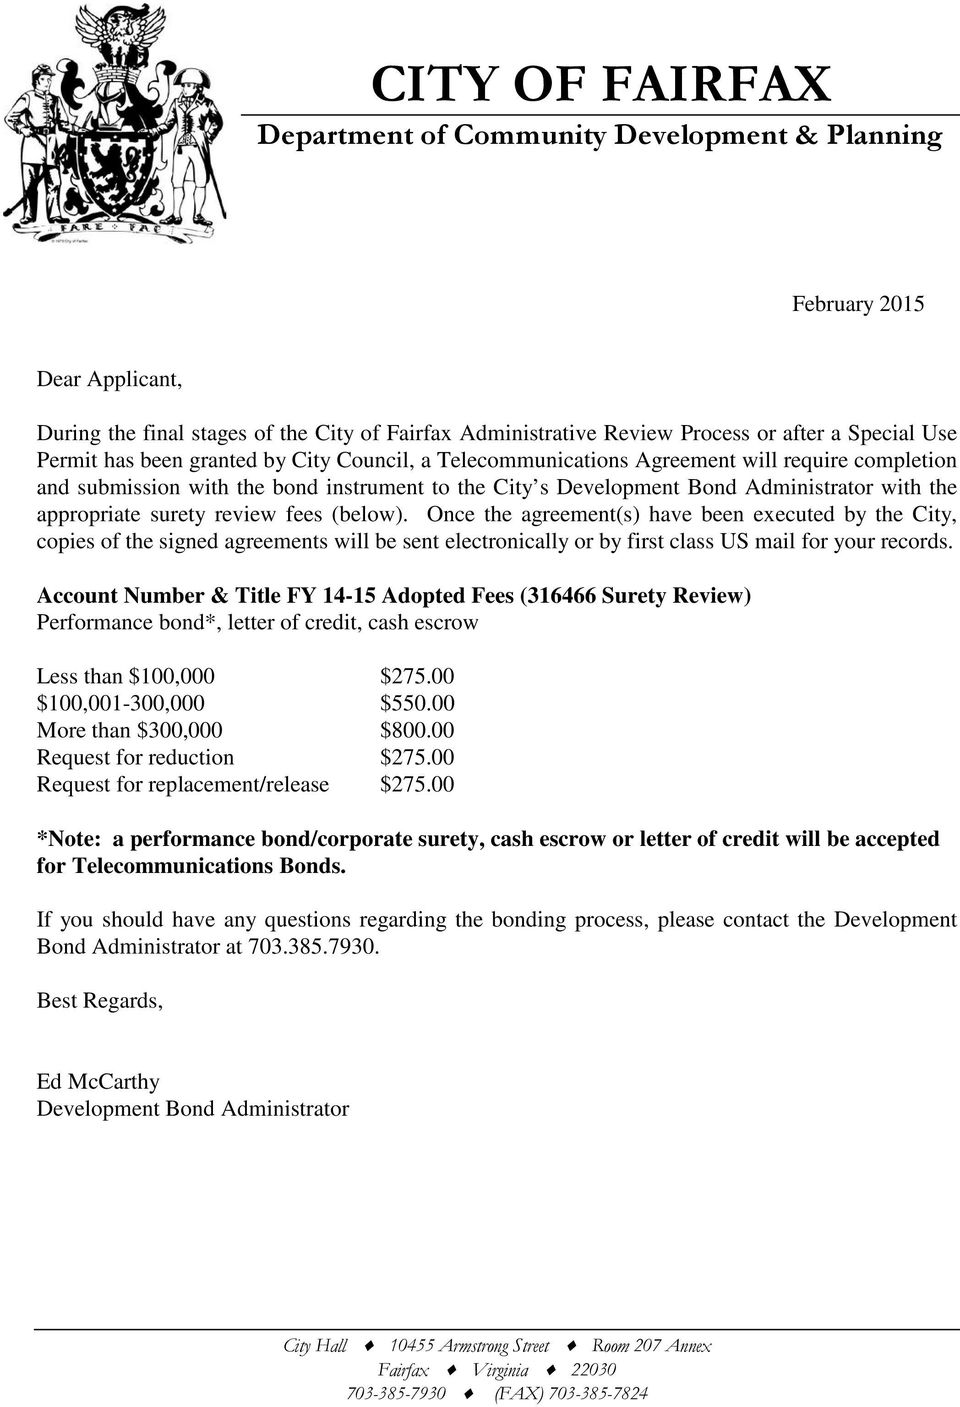 surety review fees (below). Once the agreement(s) have been executed by the City, copies of the signed agreements will be sent electronically or by first class US mail for your records.